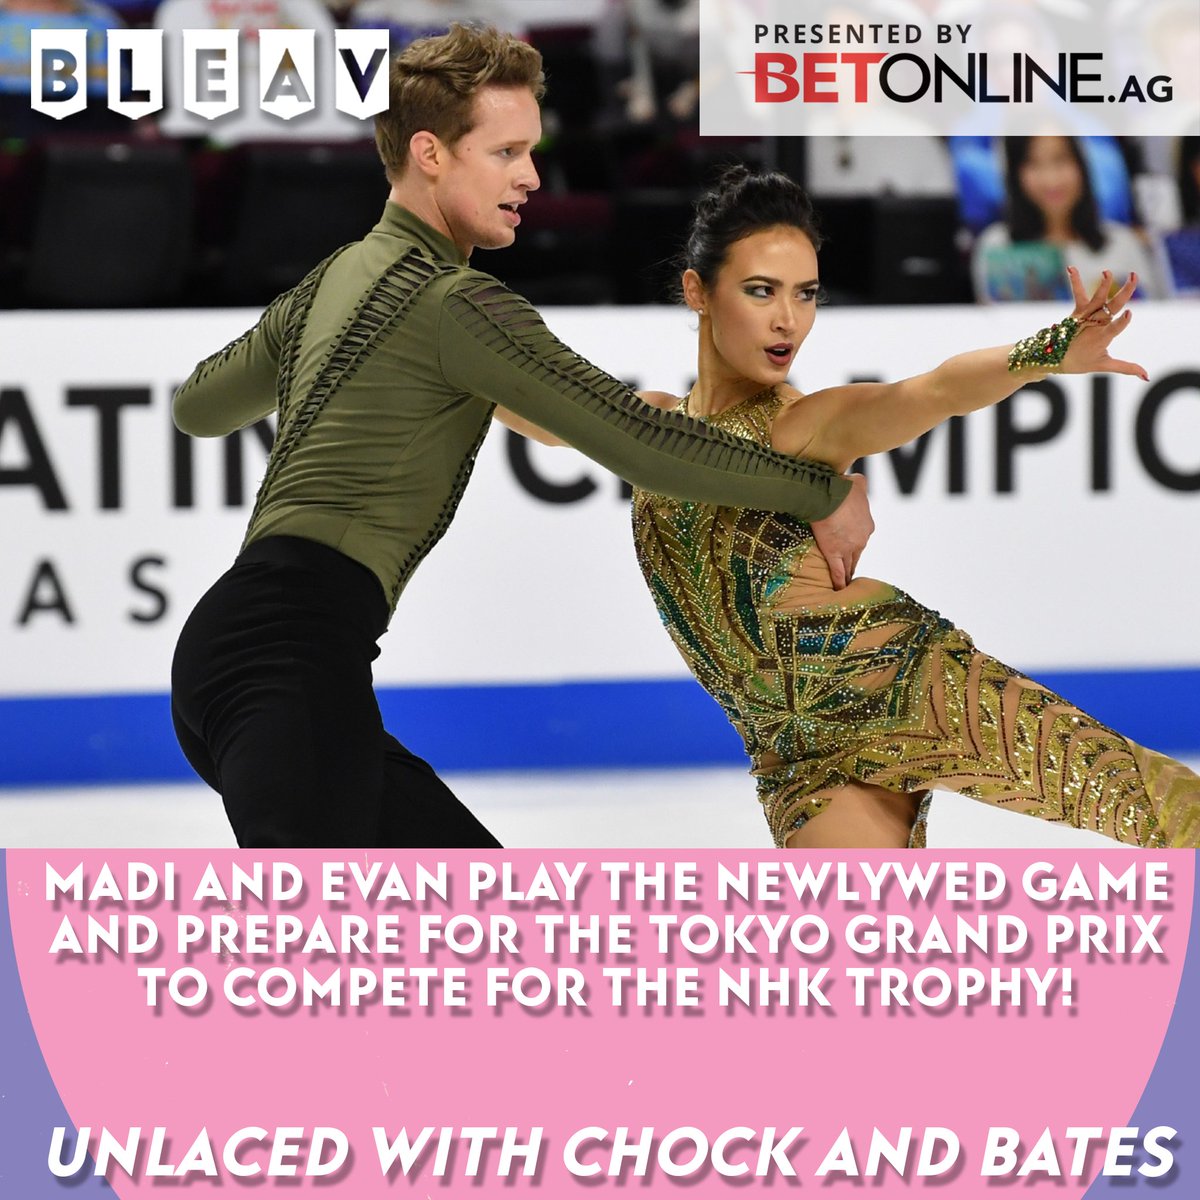 .@chockolate02 and @Evan_Bates are heading to Tokyo to compete for the NHK Trophy! Tune in as they preview the trip + play the Newlywed game! @ChockBates is presented by @betonline_ag: podcasts.apple.com/us/podcast/unl…